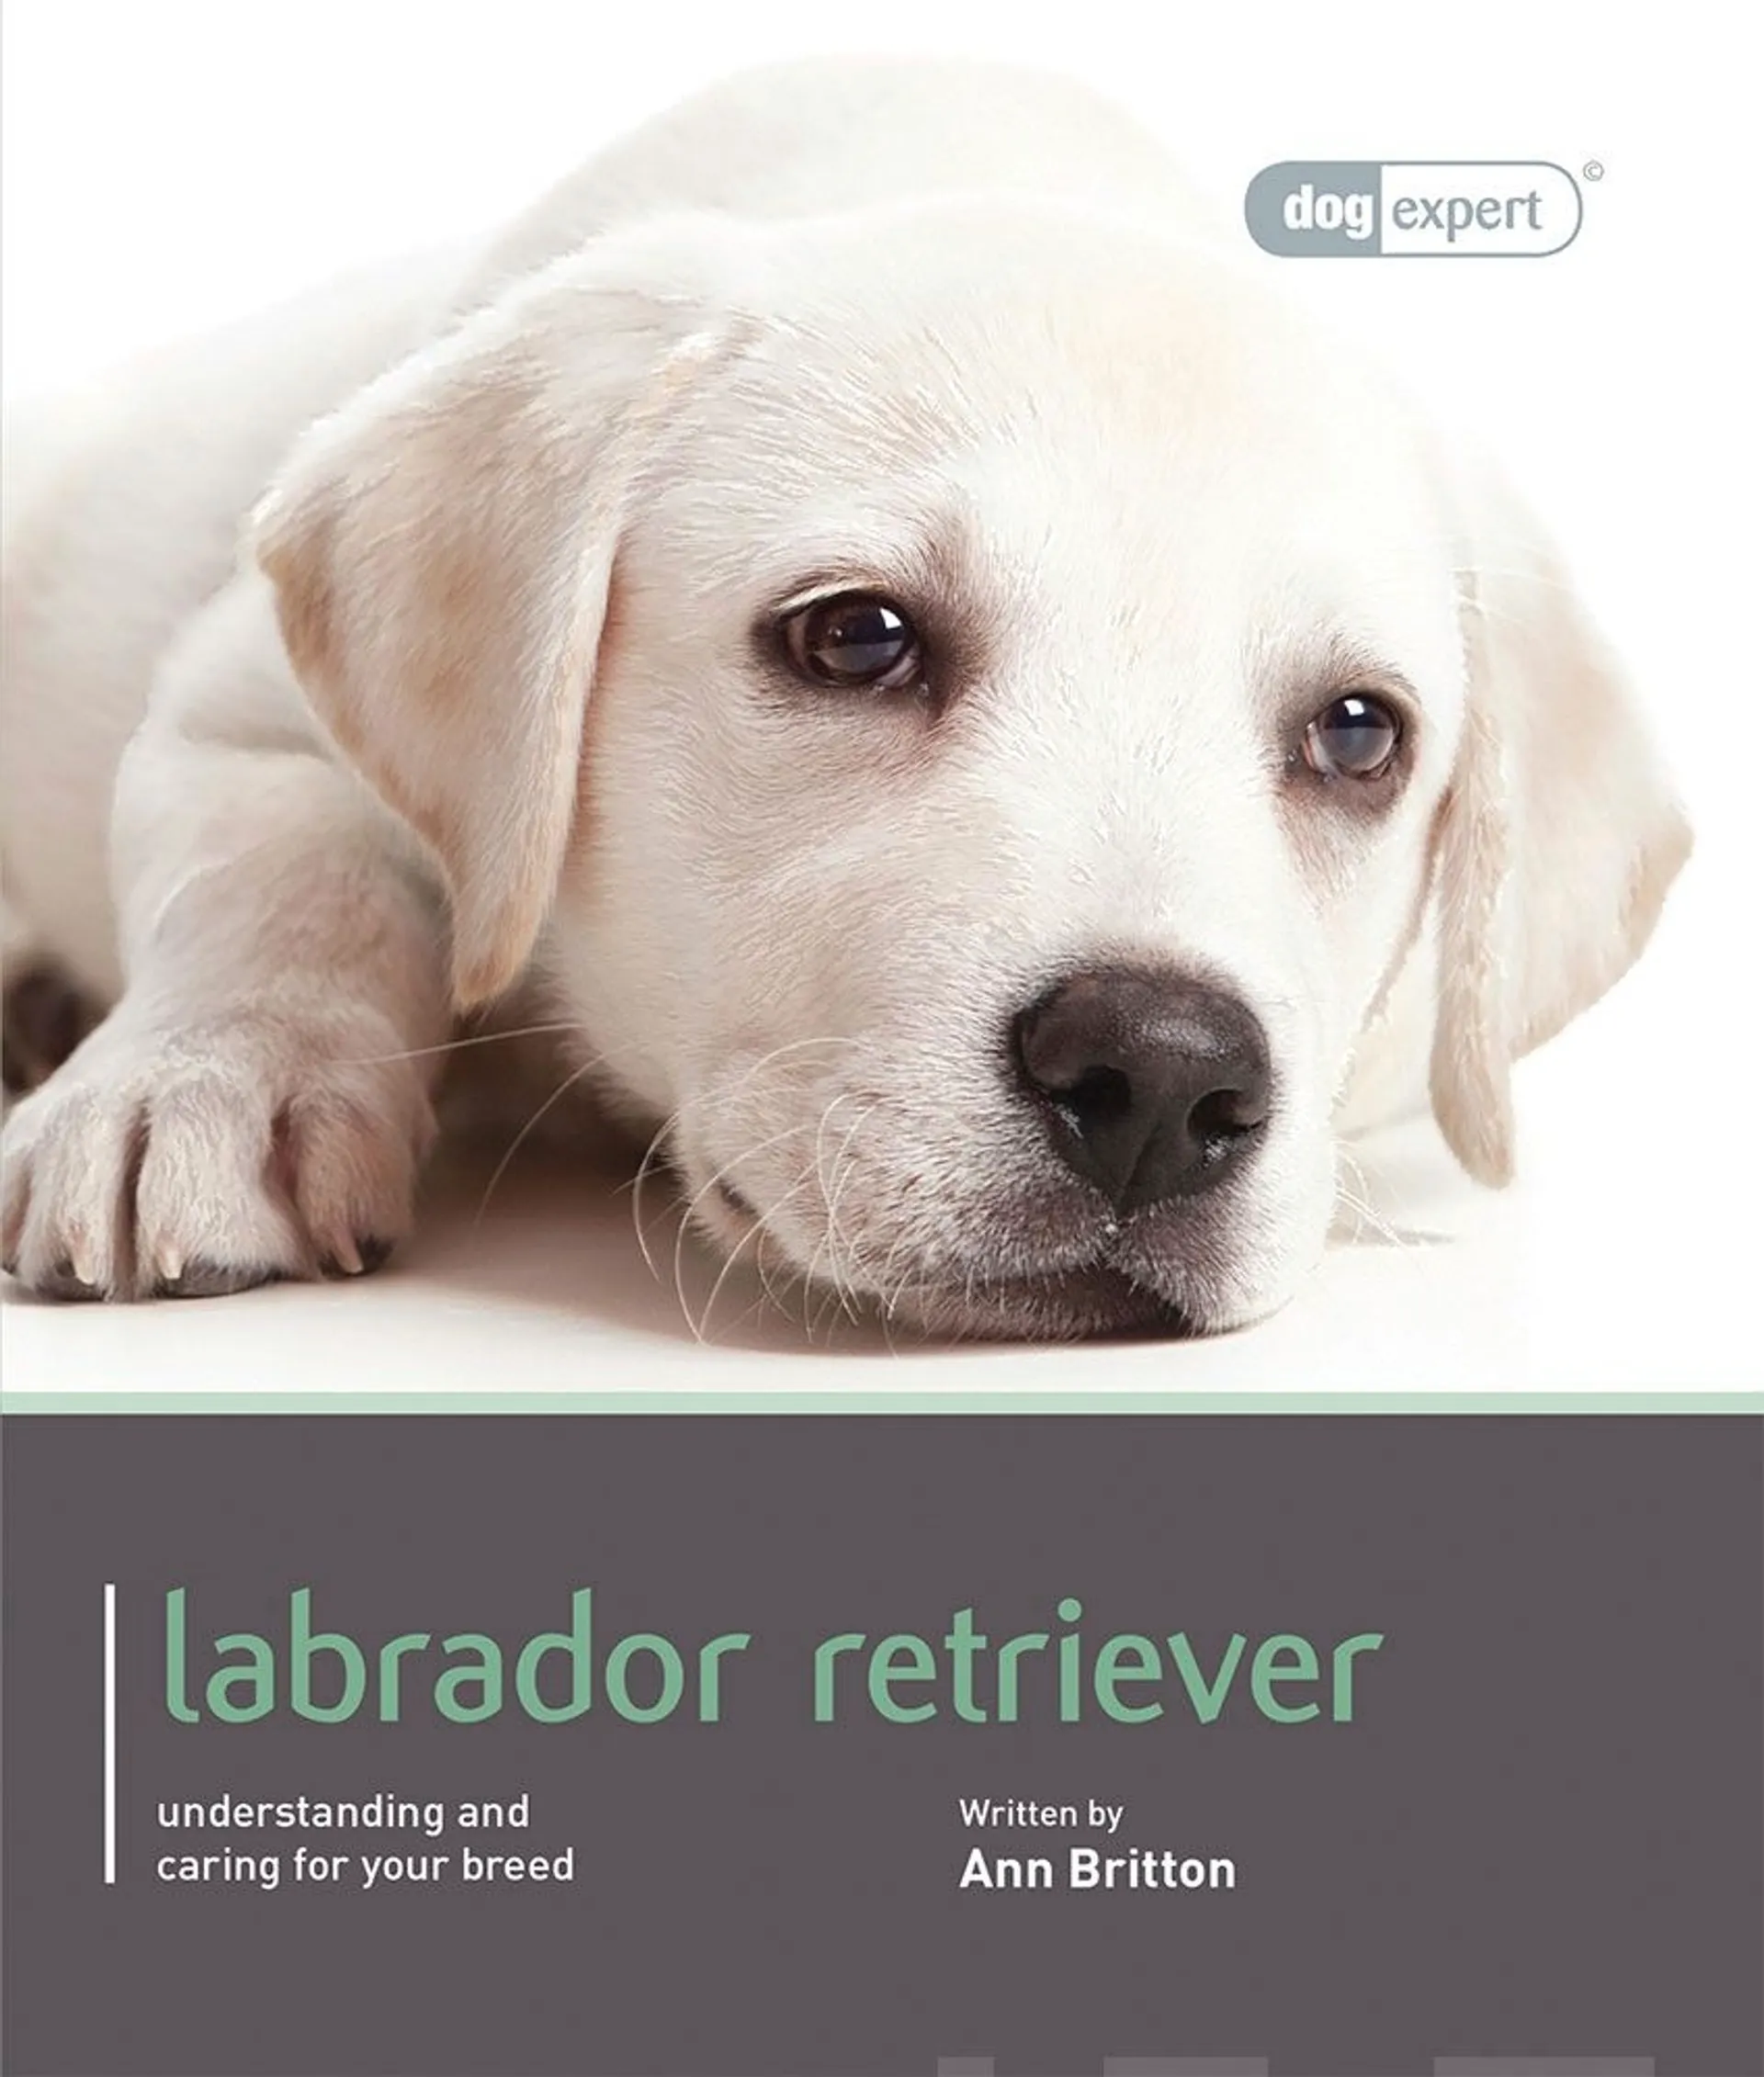 Britton, Labrador - Understanding and caring for your breed